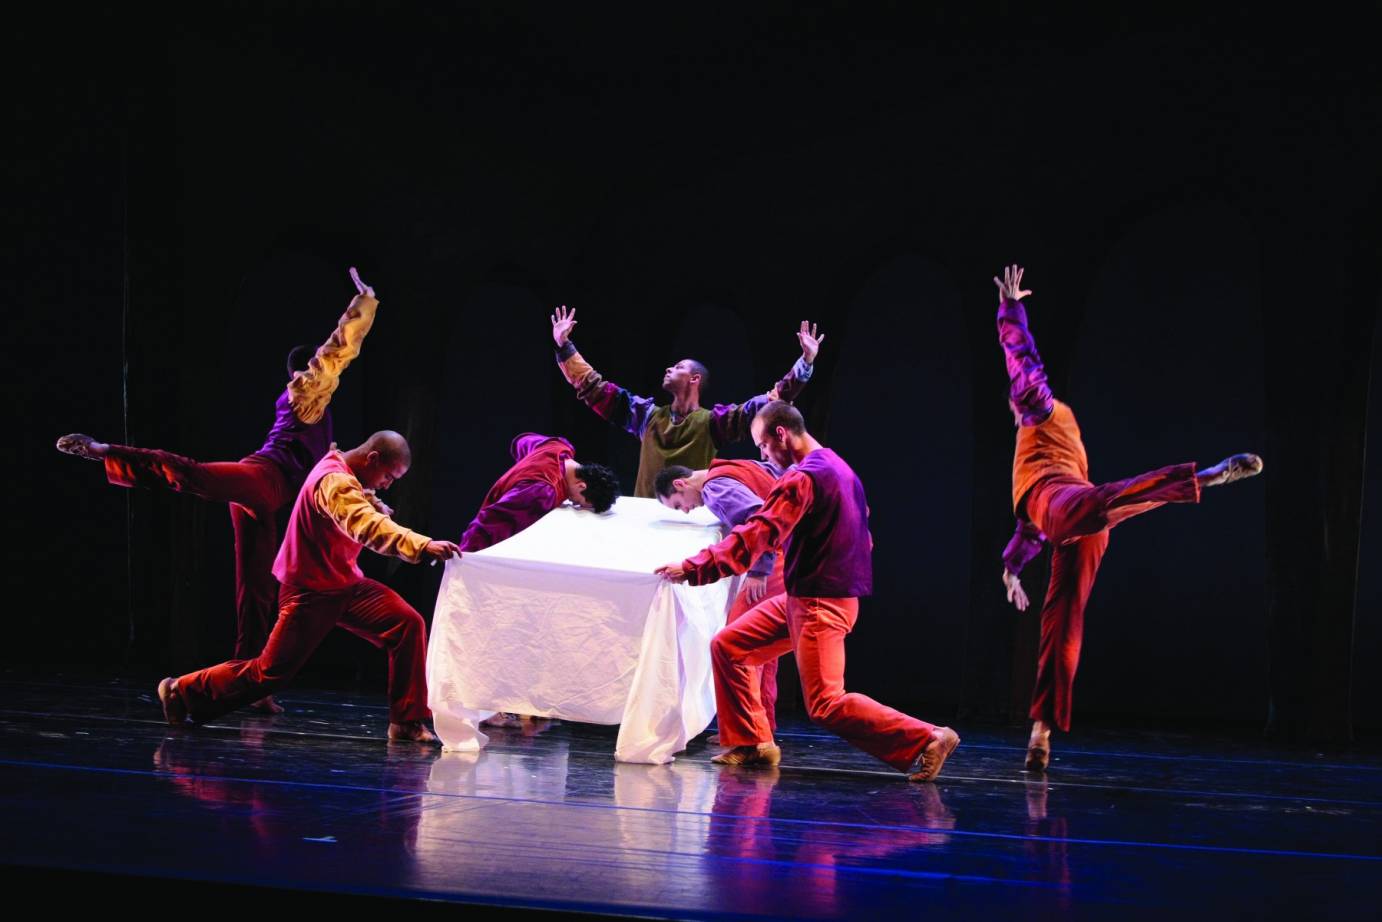 Male dancers dressed in reds, yellows and purples cluster around a table with a white tablecloth